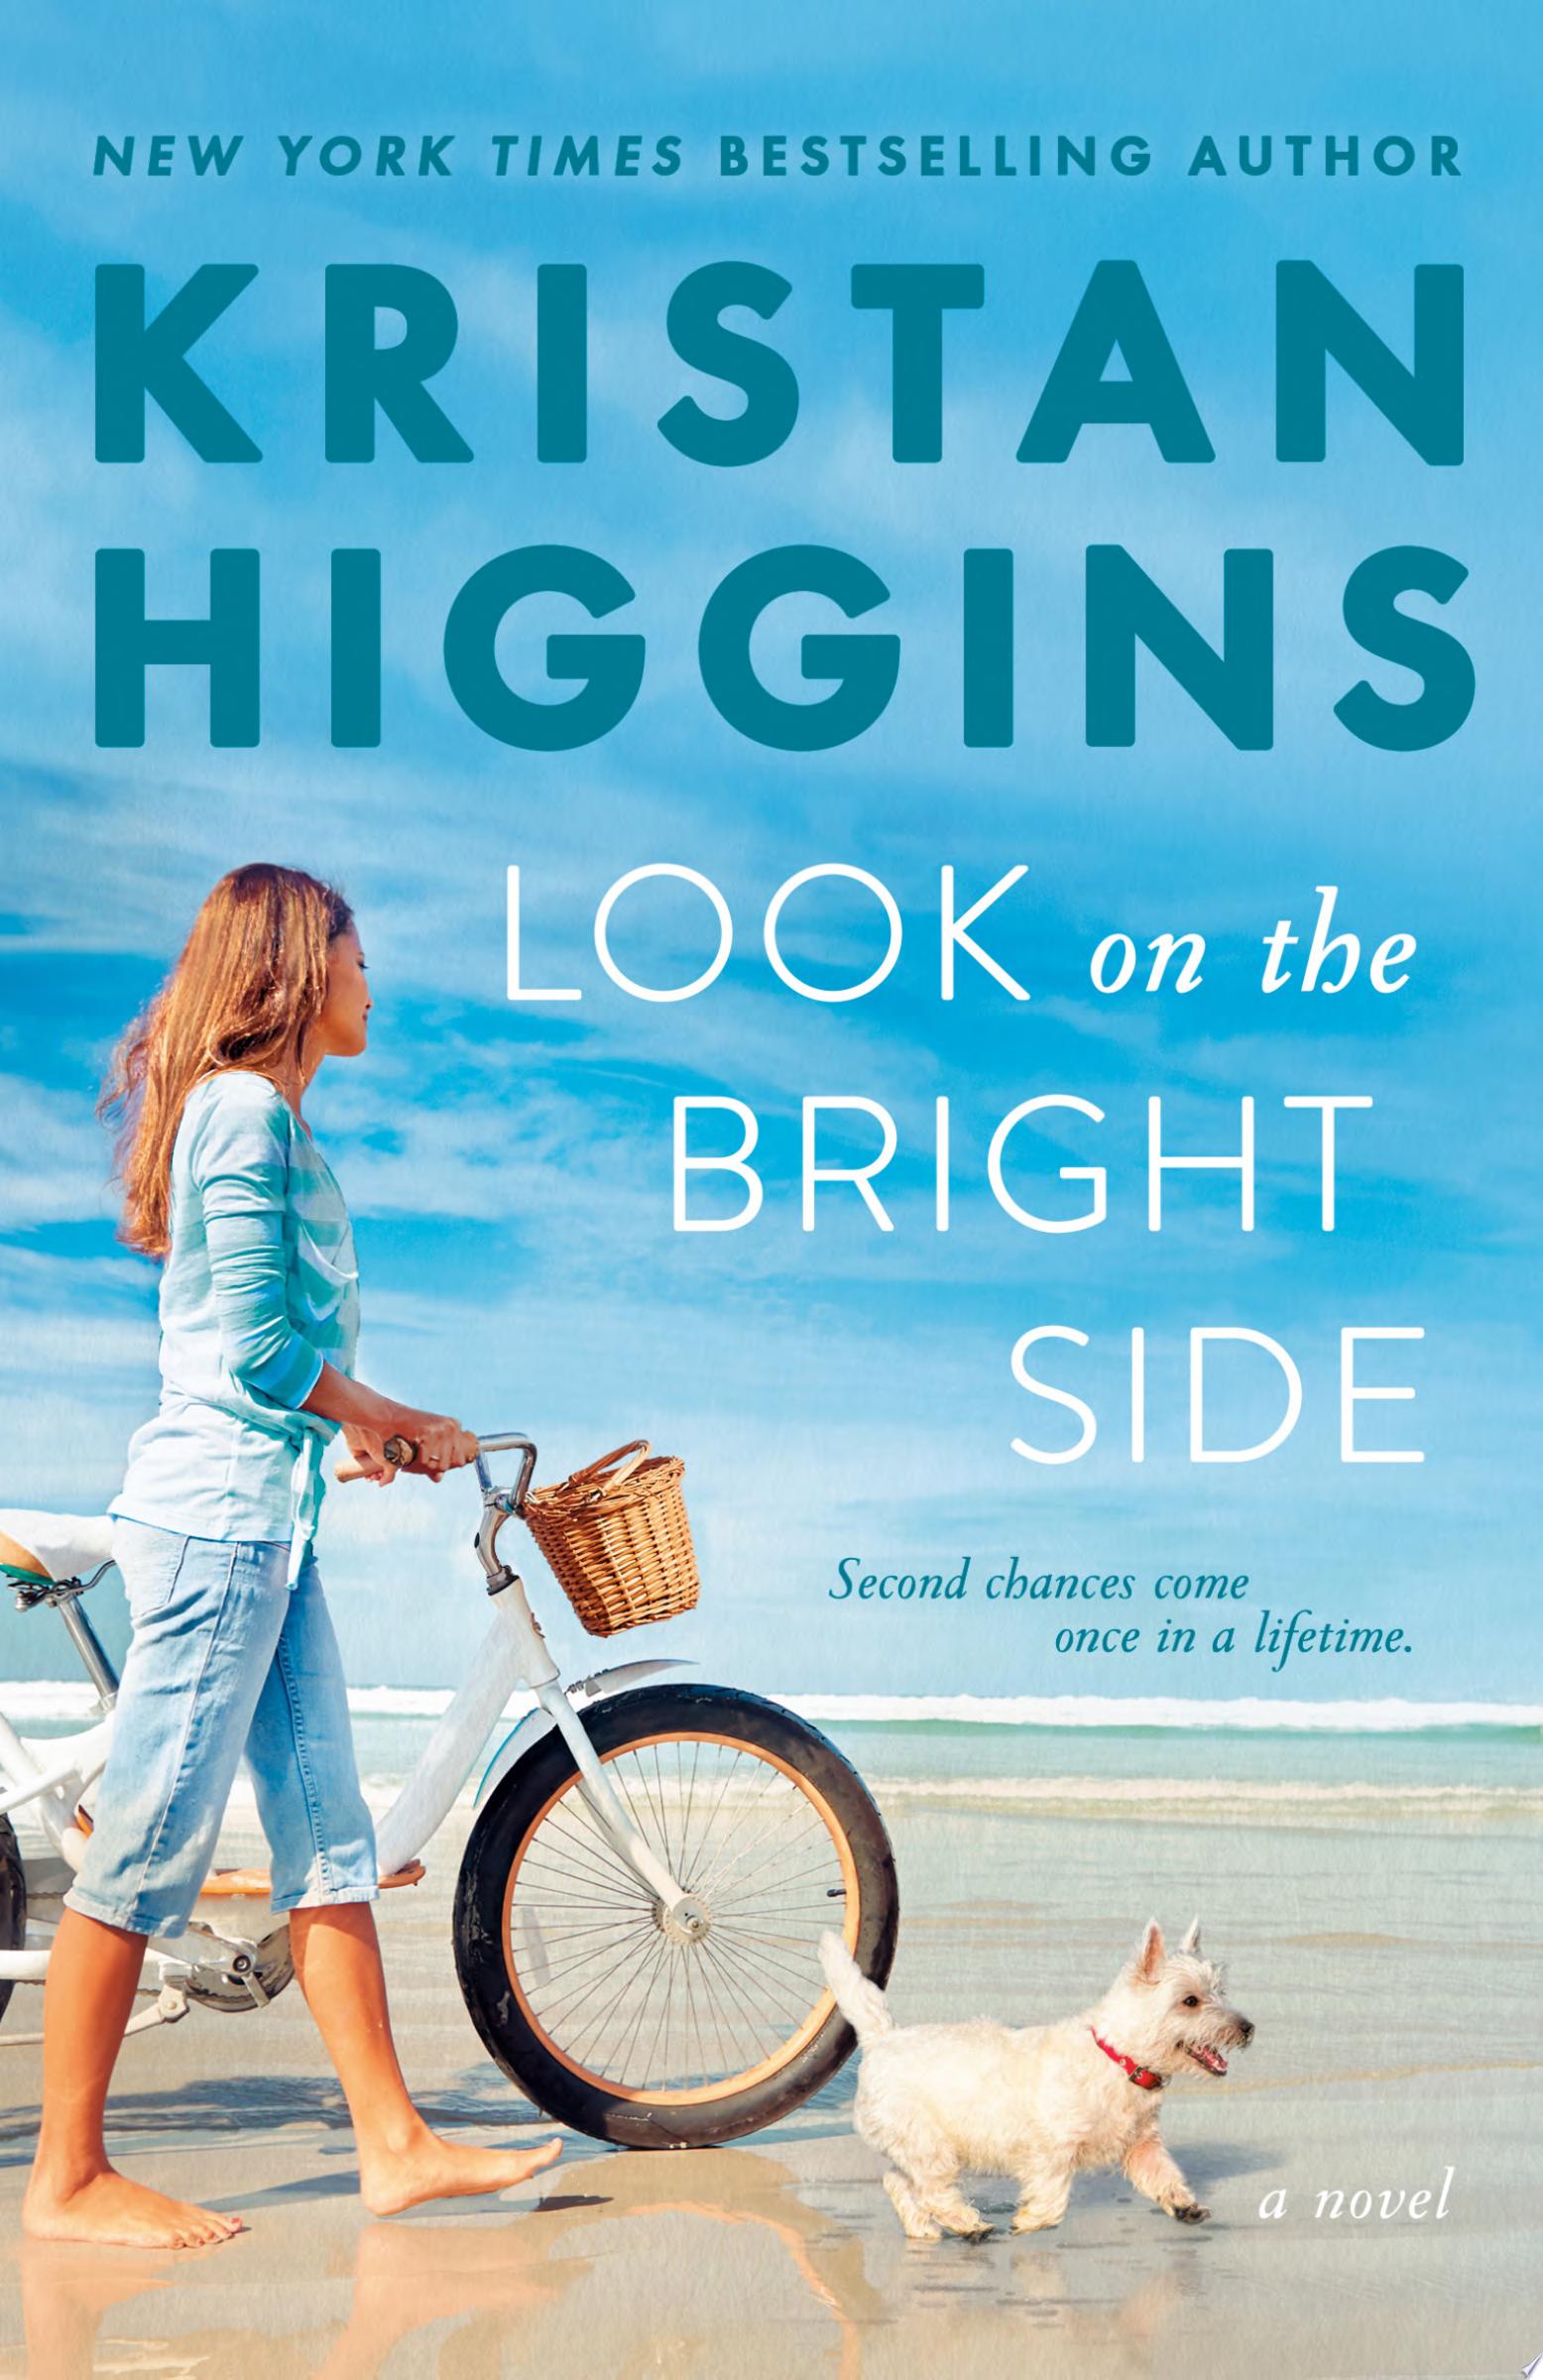 Image for "Look on the Bright Side"